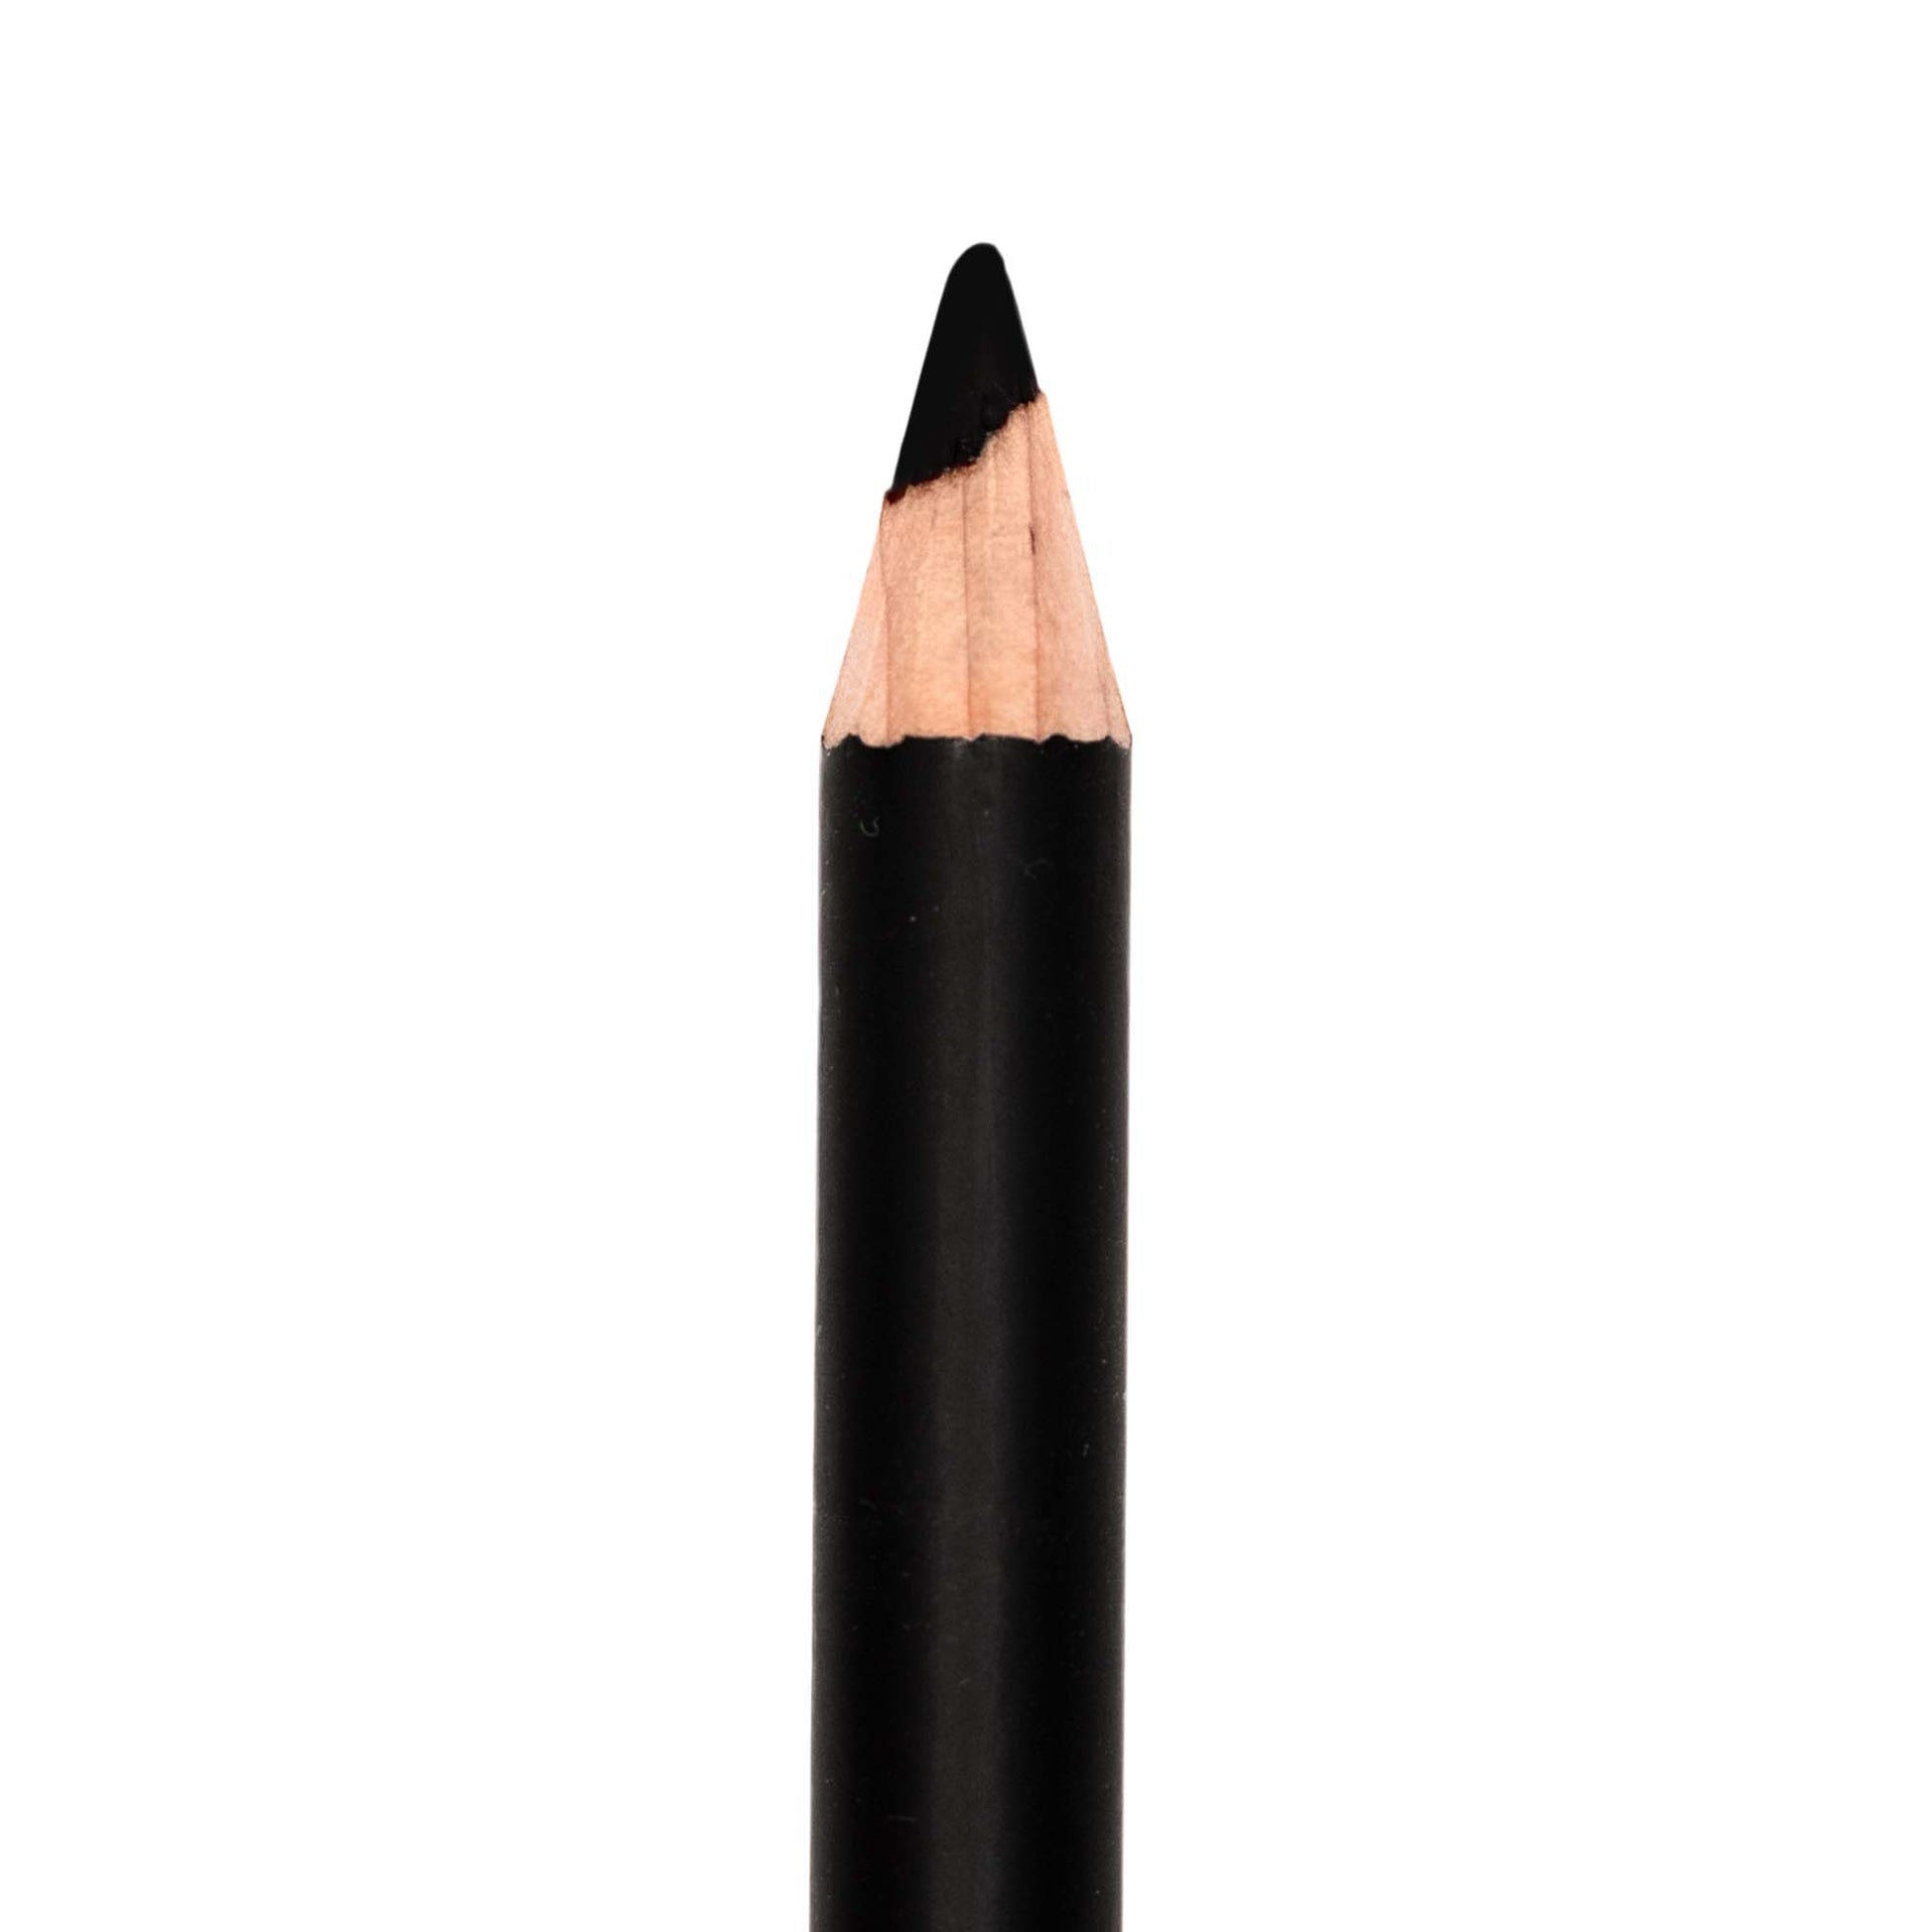 Unleash your inner artist and let your eyes speak for themselves with our White Eye Pencil. Adept at drama, this pencil is made from natural, organic ingredients for a guilt-free, eye-catching look. Dare to be different and embrace your unique style with Cruisin Organics!